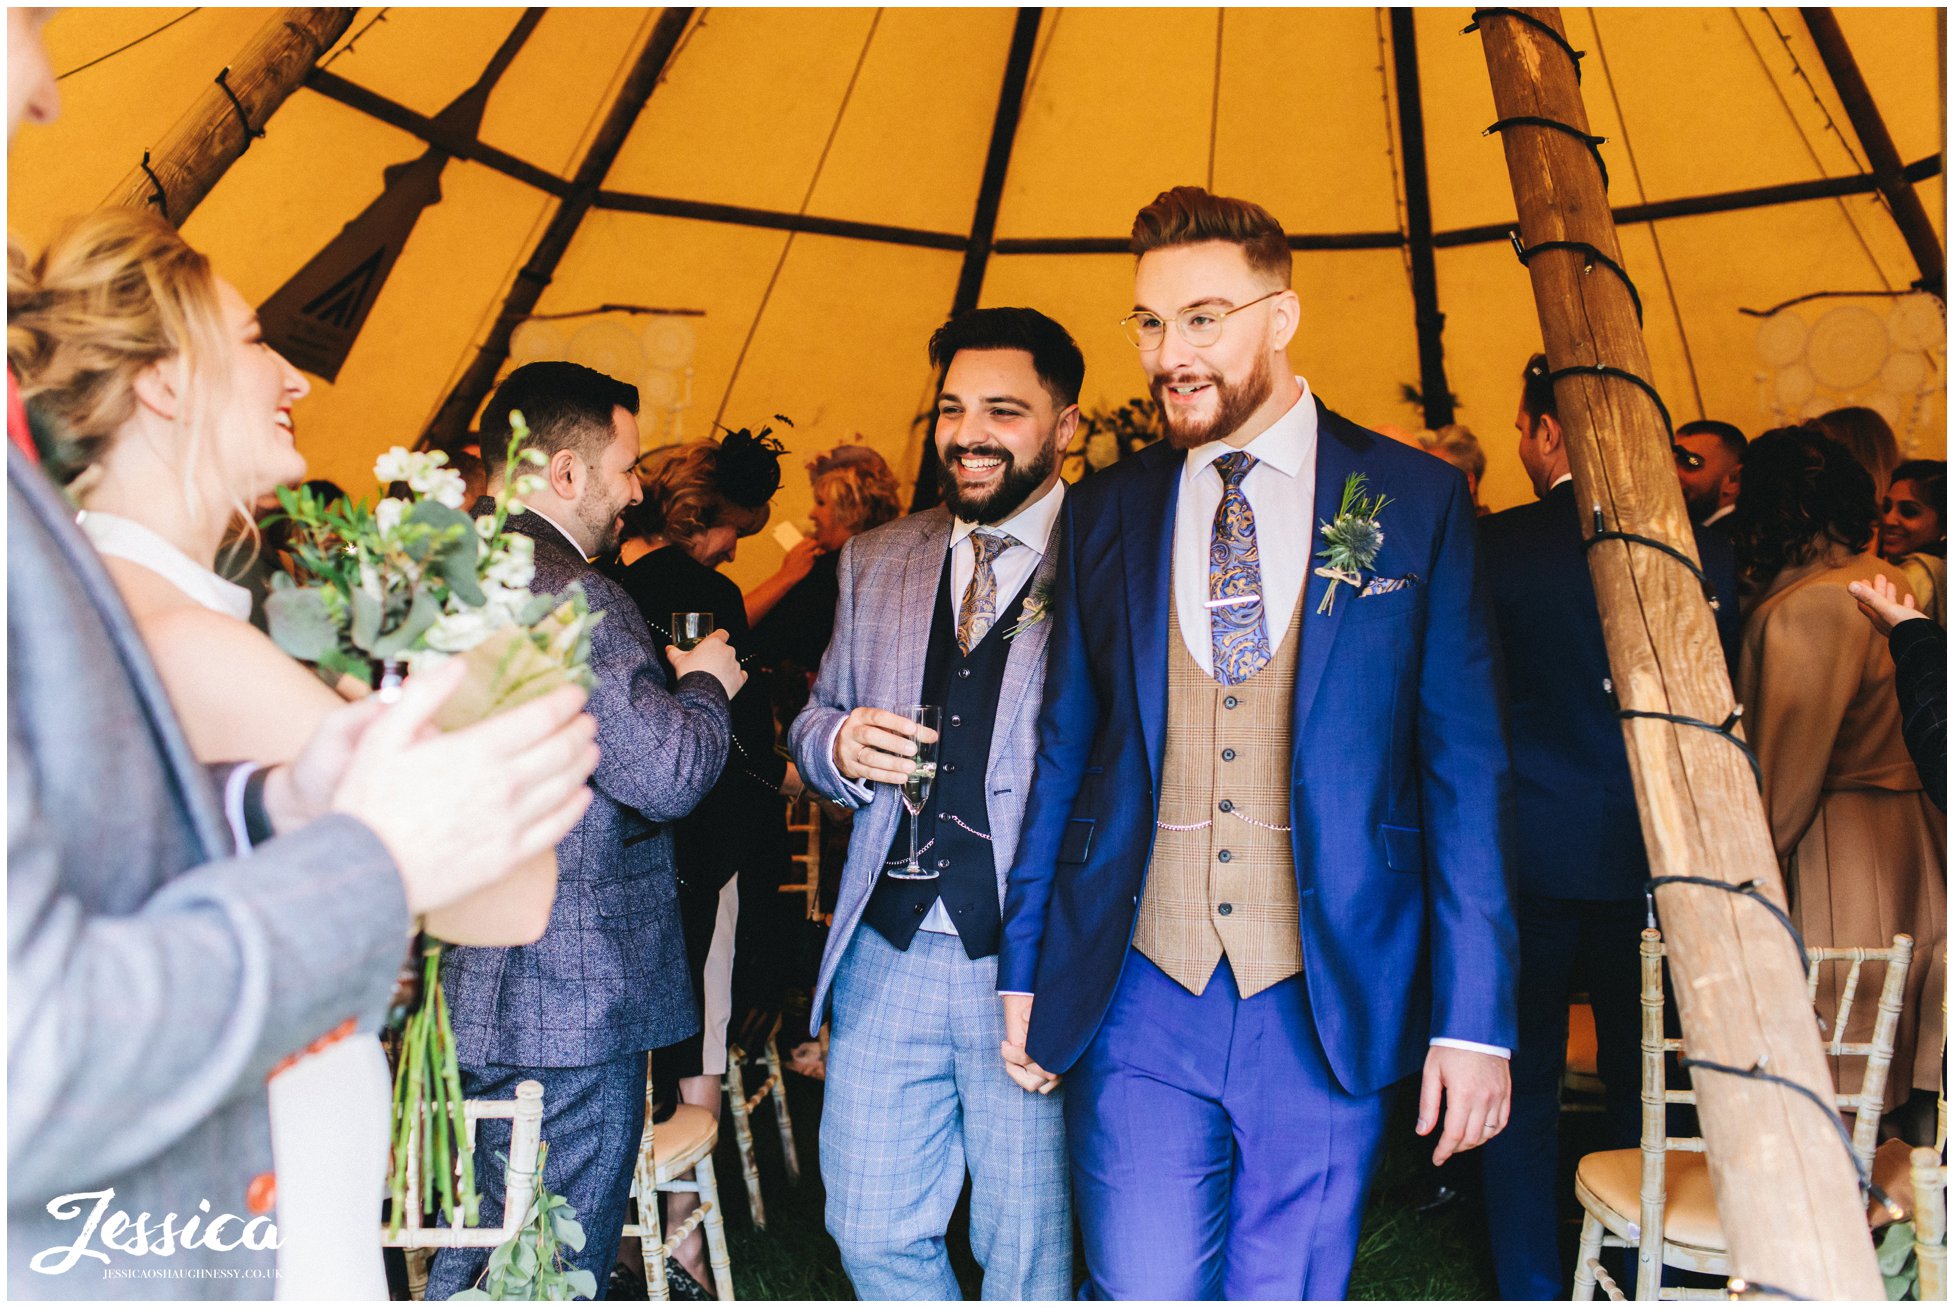 the newly wed's walk out of the tipi as husband and husband